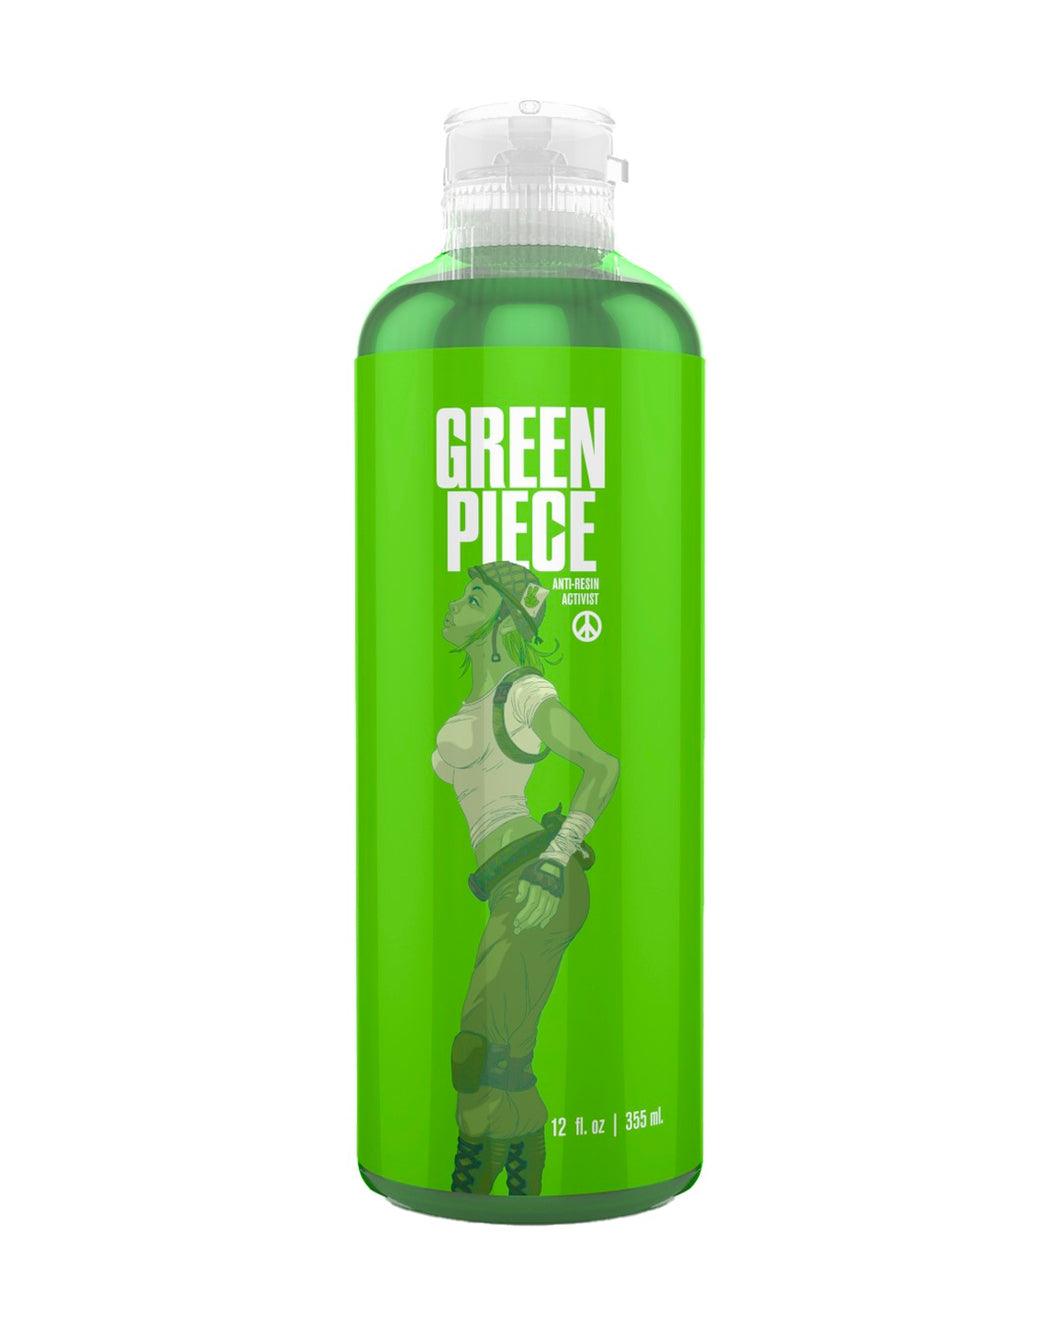 A 12 oz bottle of Green Piece Anti-Resin Activist Cleaner.